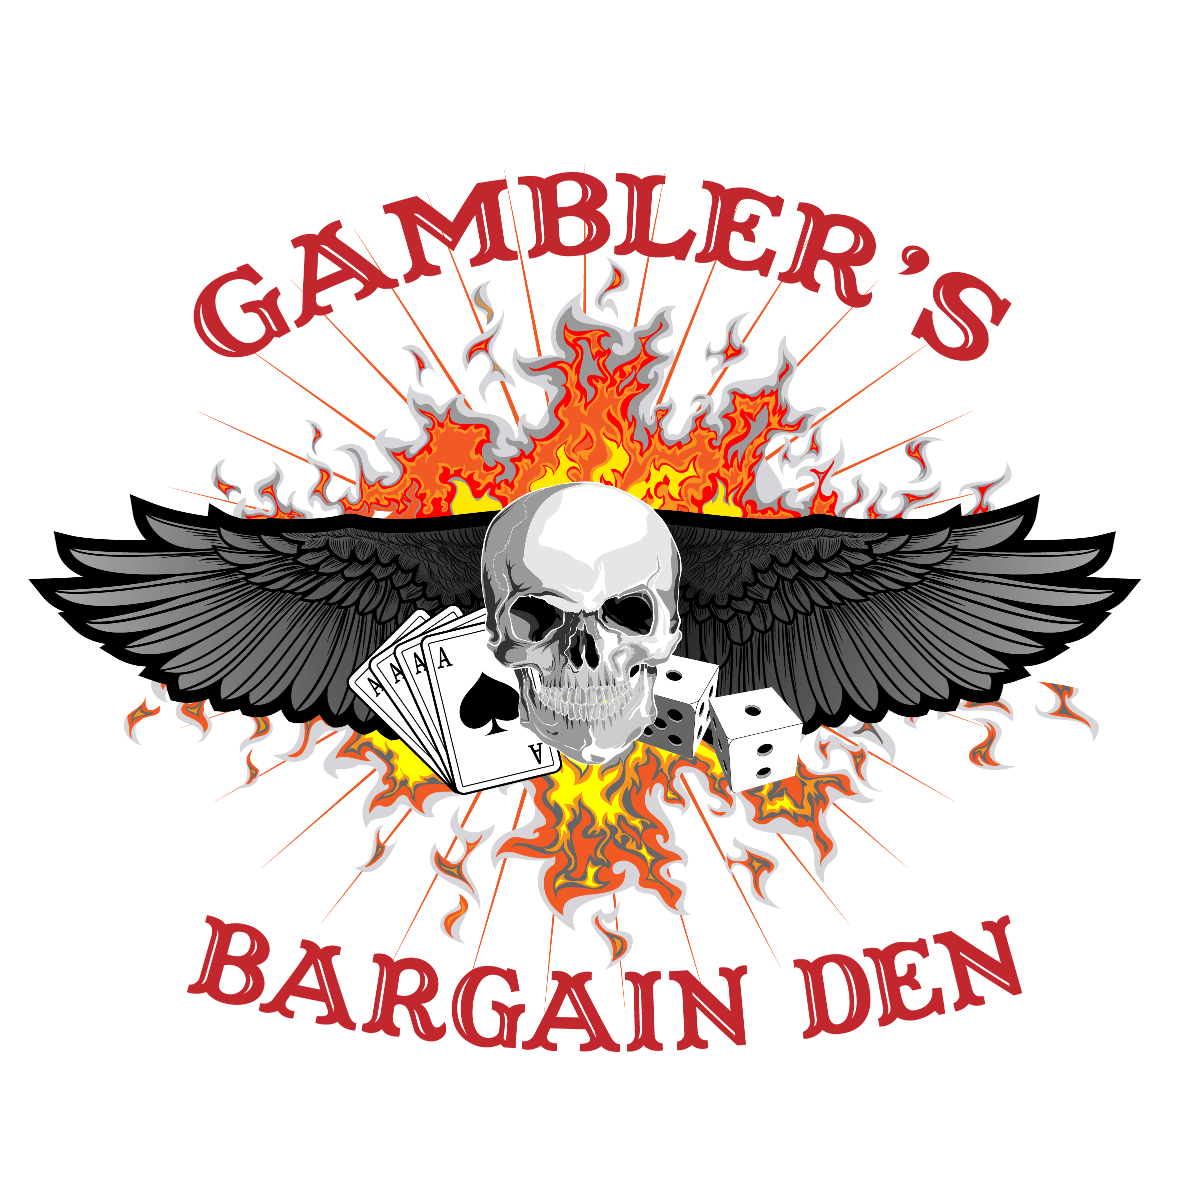 Gamblers Bargain Den offers many casino supplies, poker chips, casino equipment and game tables, including novelty and bar room supplies for your poker room